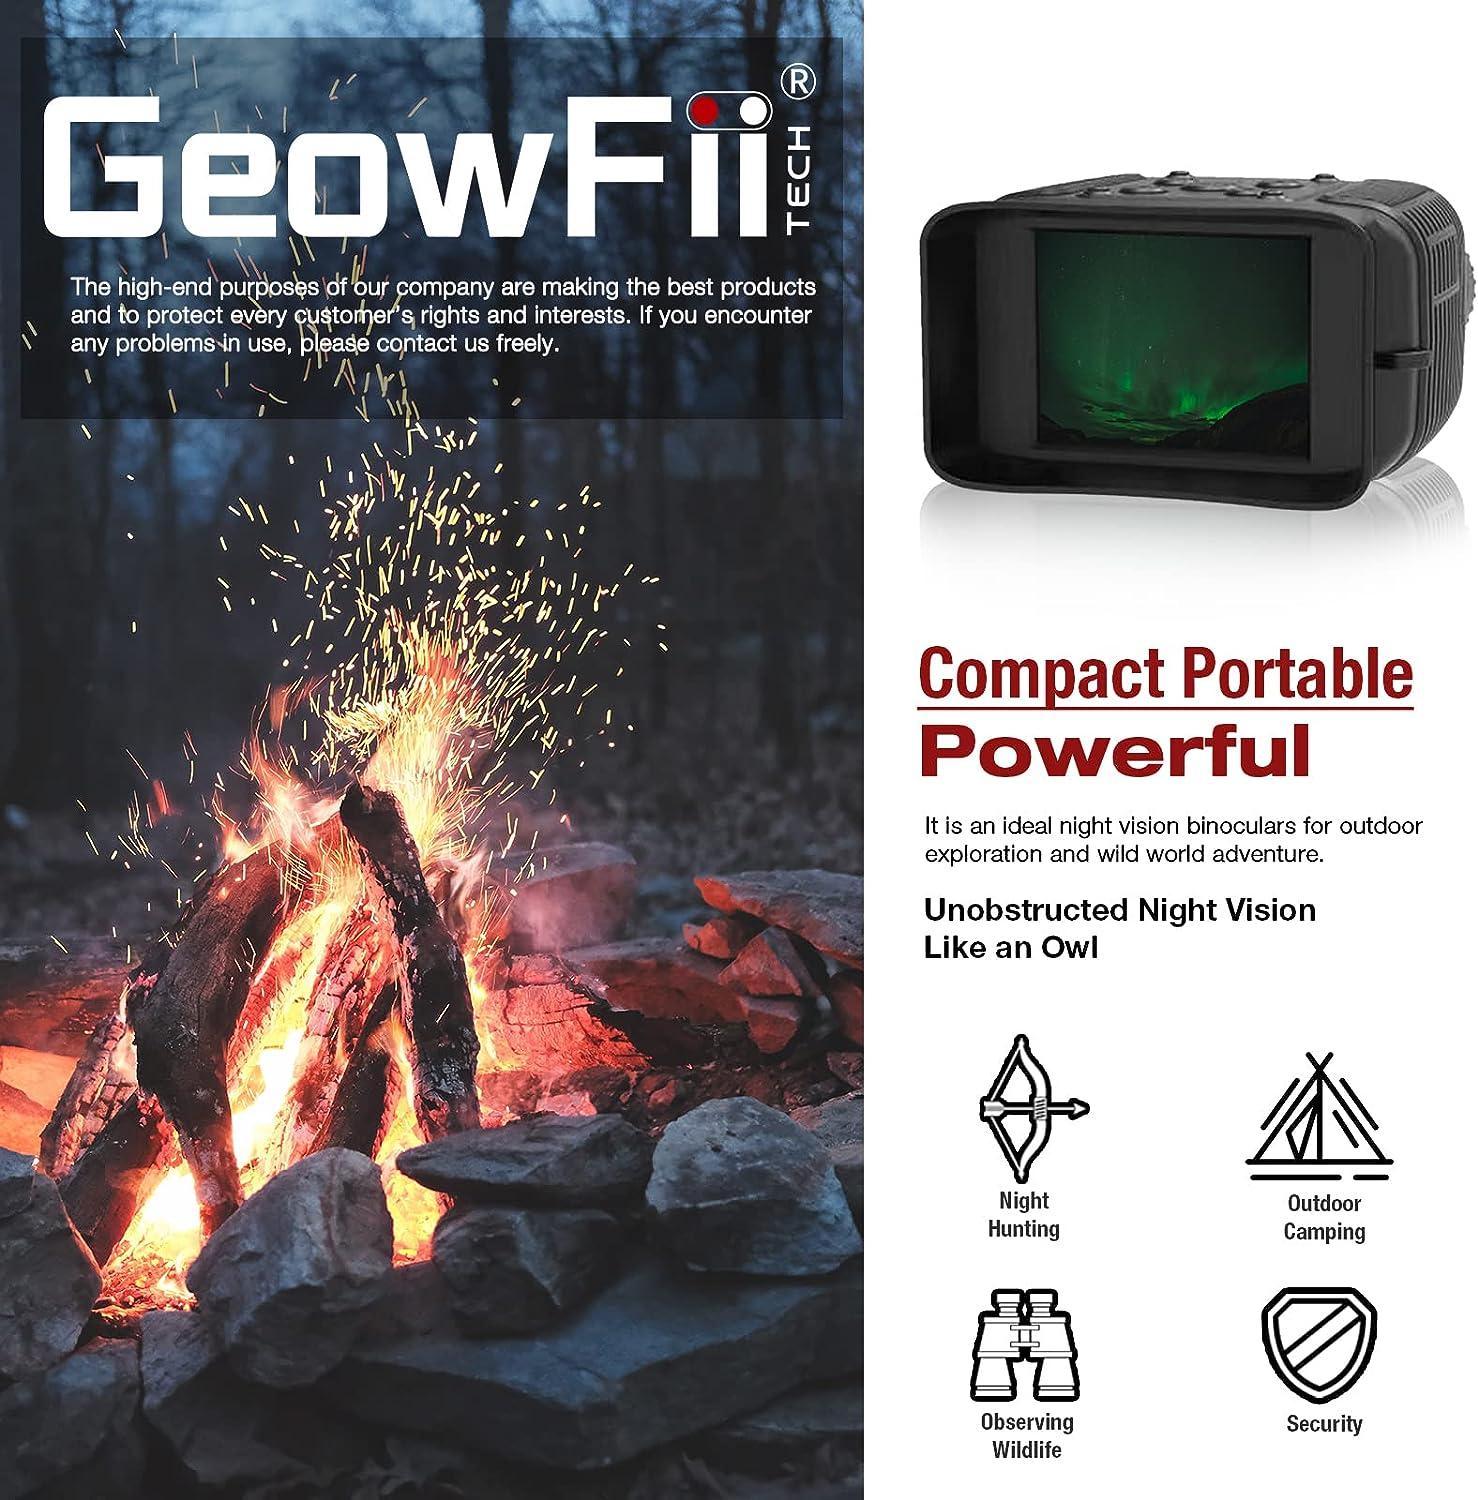 Best Night Vision Goggles and Binoculars for Camping, Security